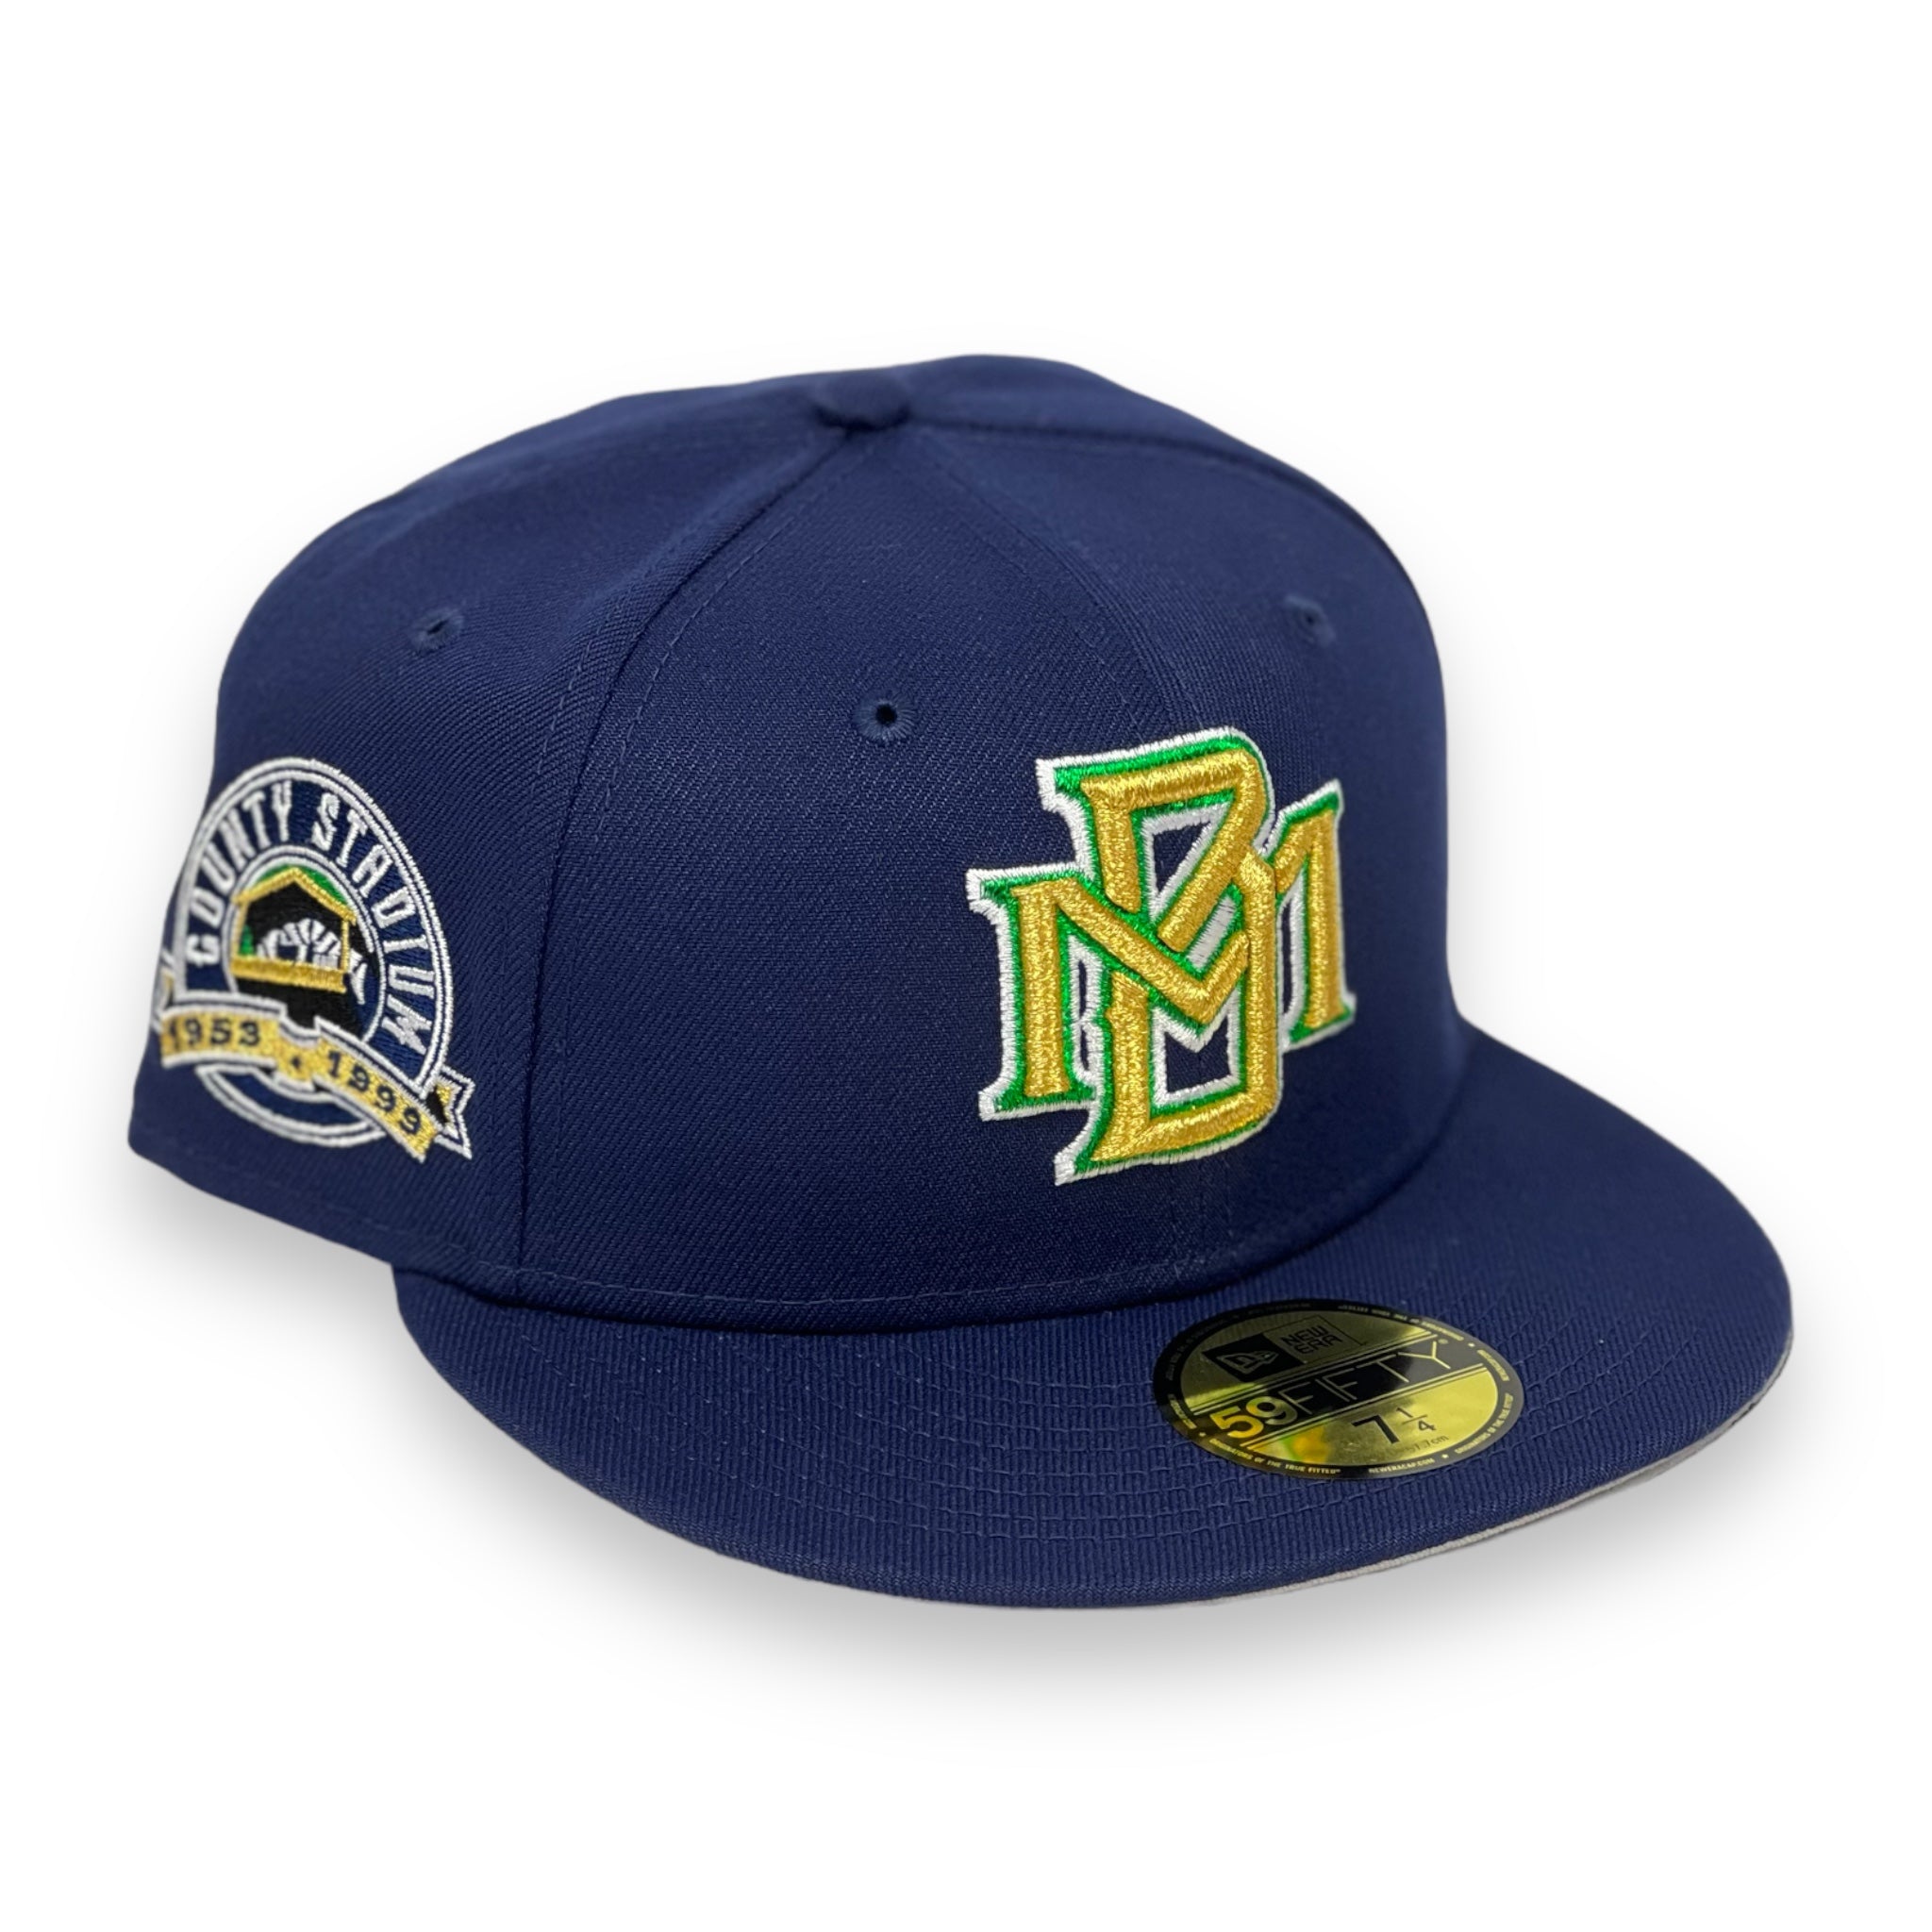 MILWAUKEE BREWERS (NAVY) (COUNTY STADIUM 1953-1999) NEW ERA 59FIFTY FITTED